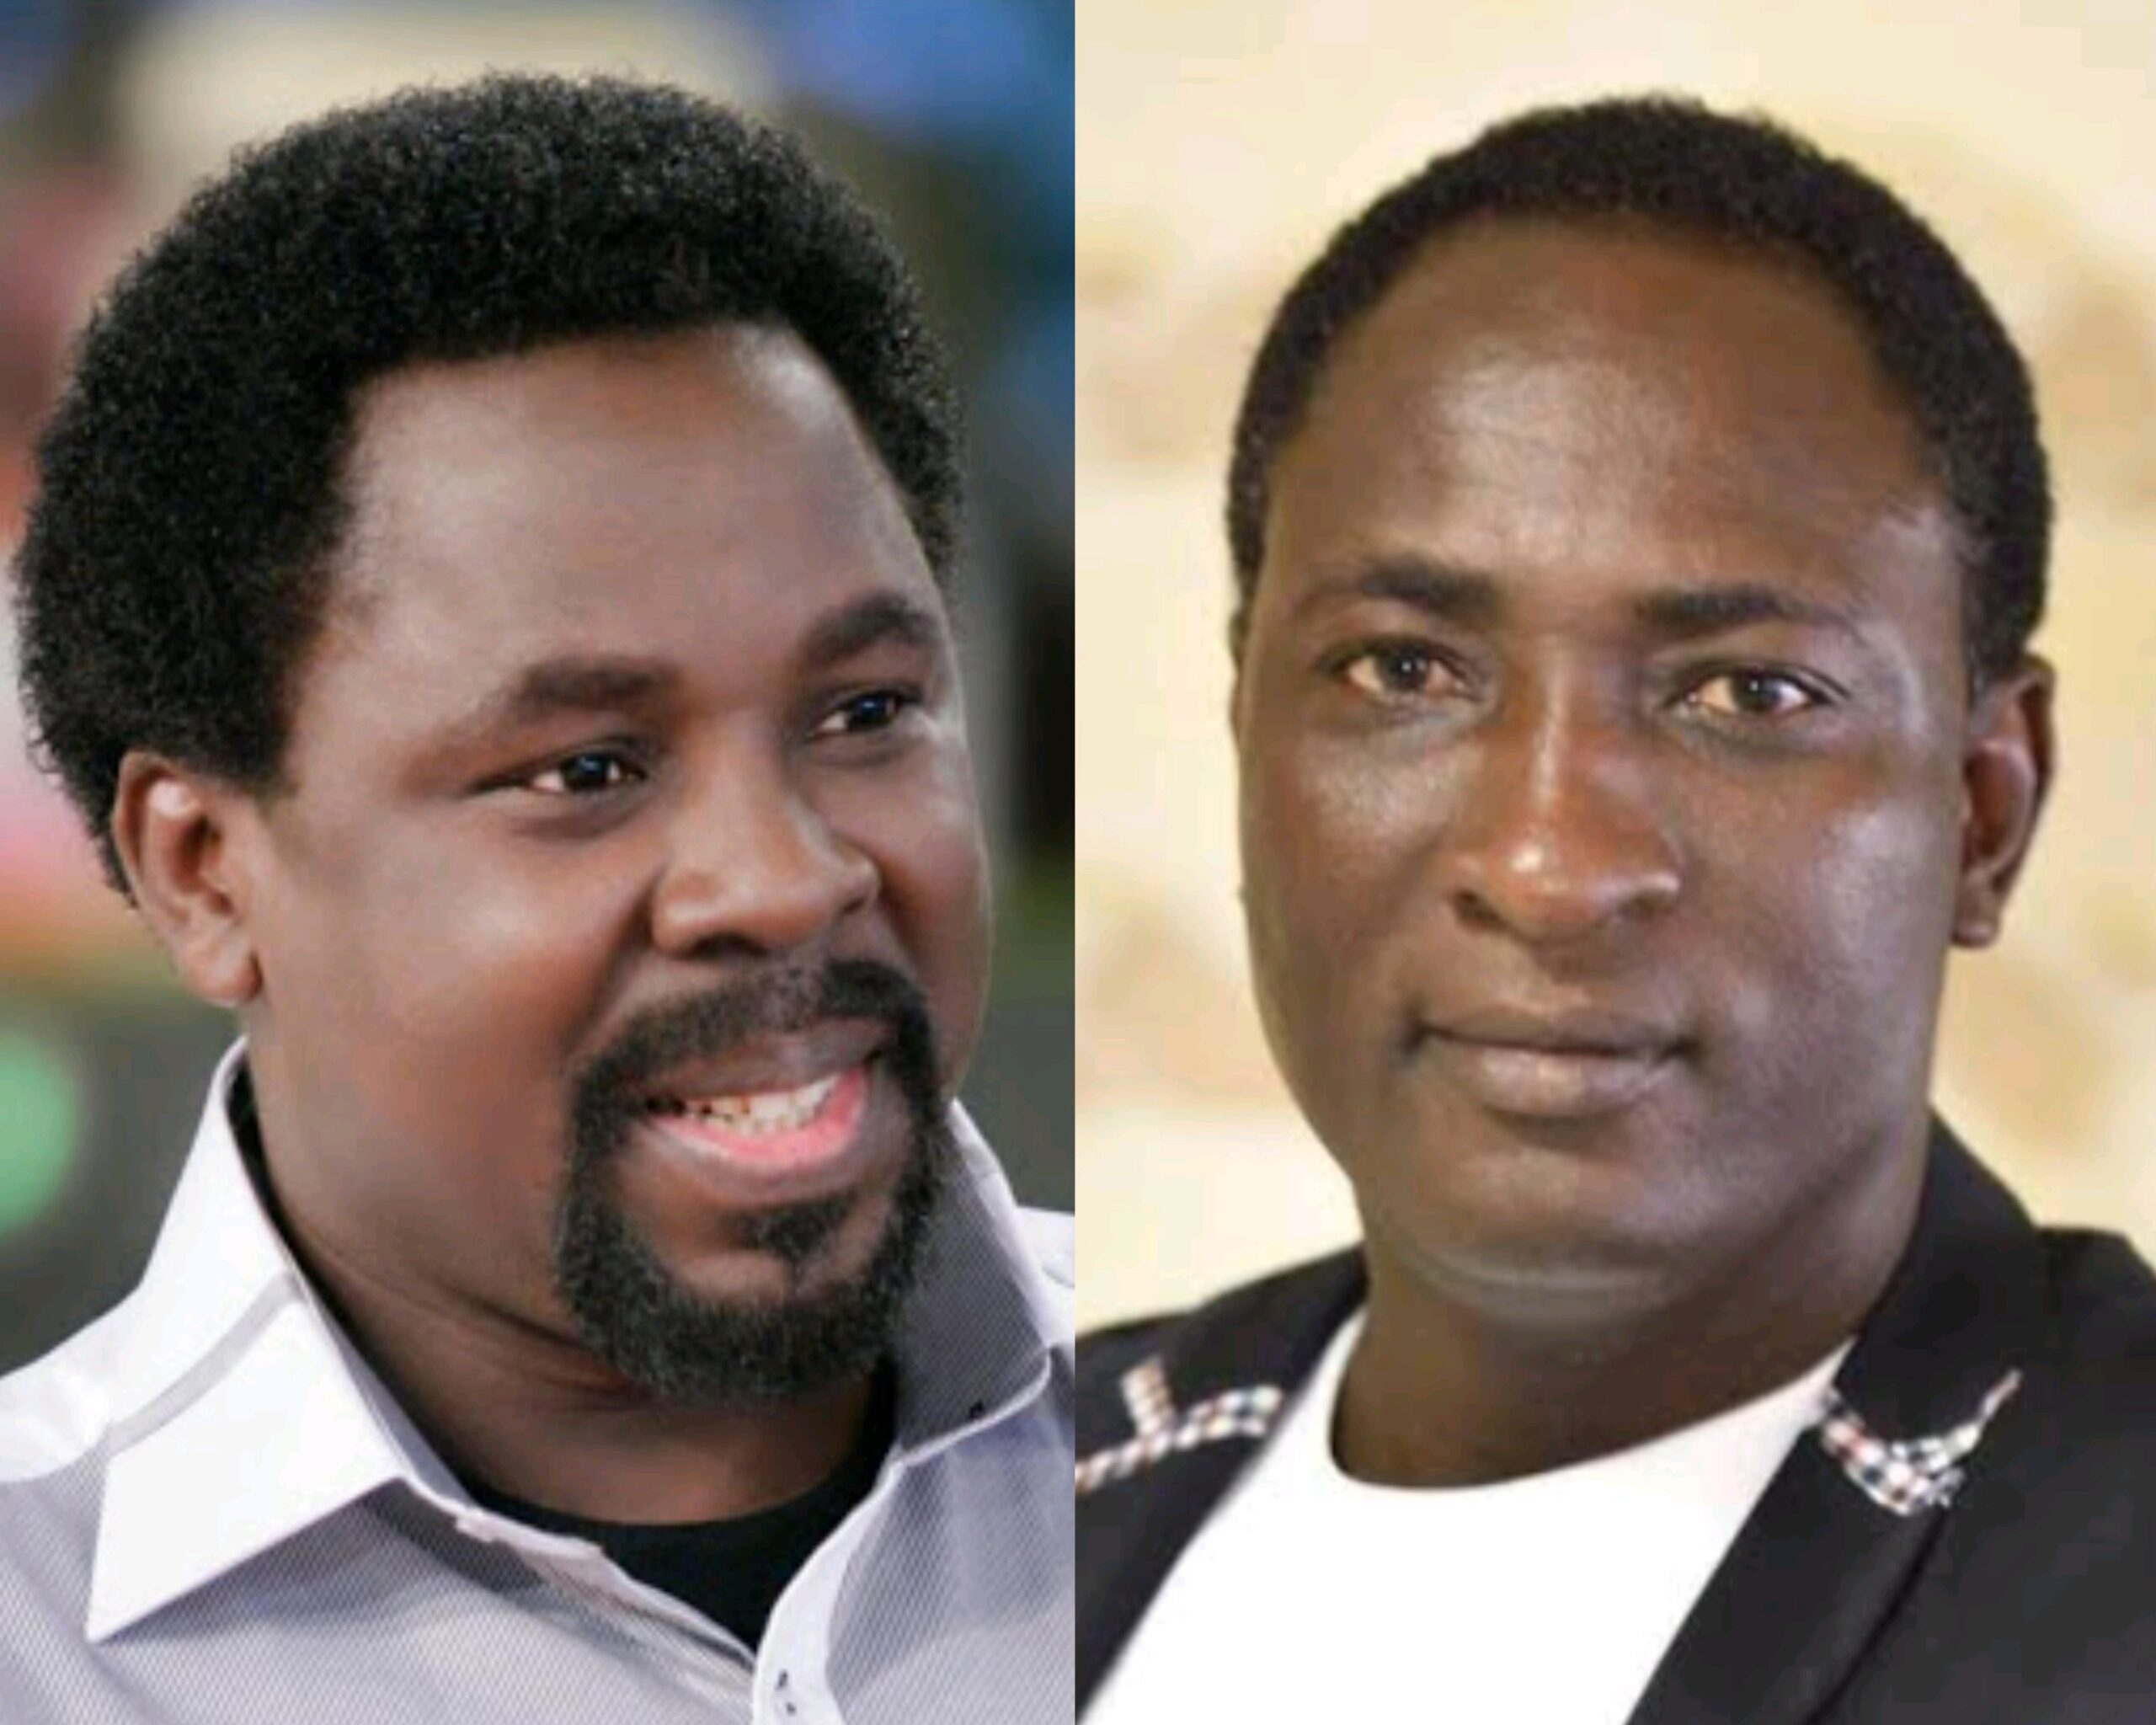 Pst Jeremiah Omoto Has Been Threatening Me Ever Since He Found Me In TB Joshua's Documentary—According to Ex-Aide